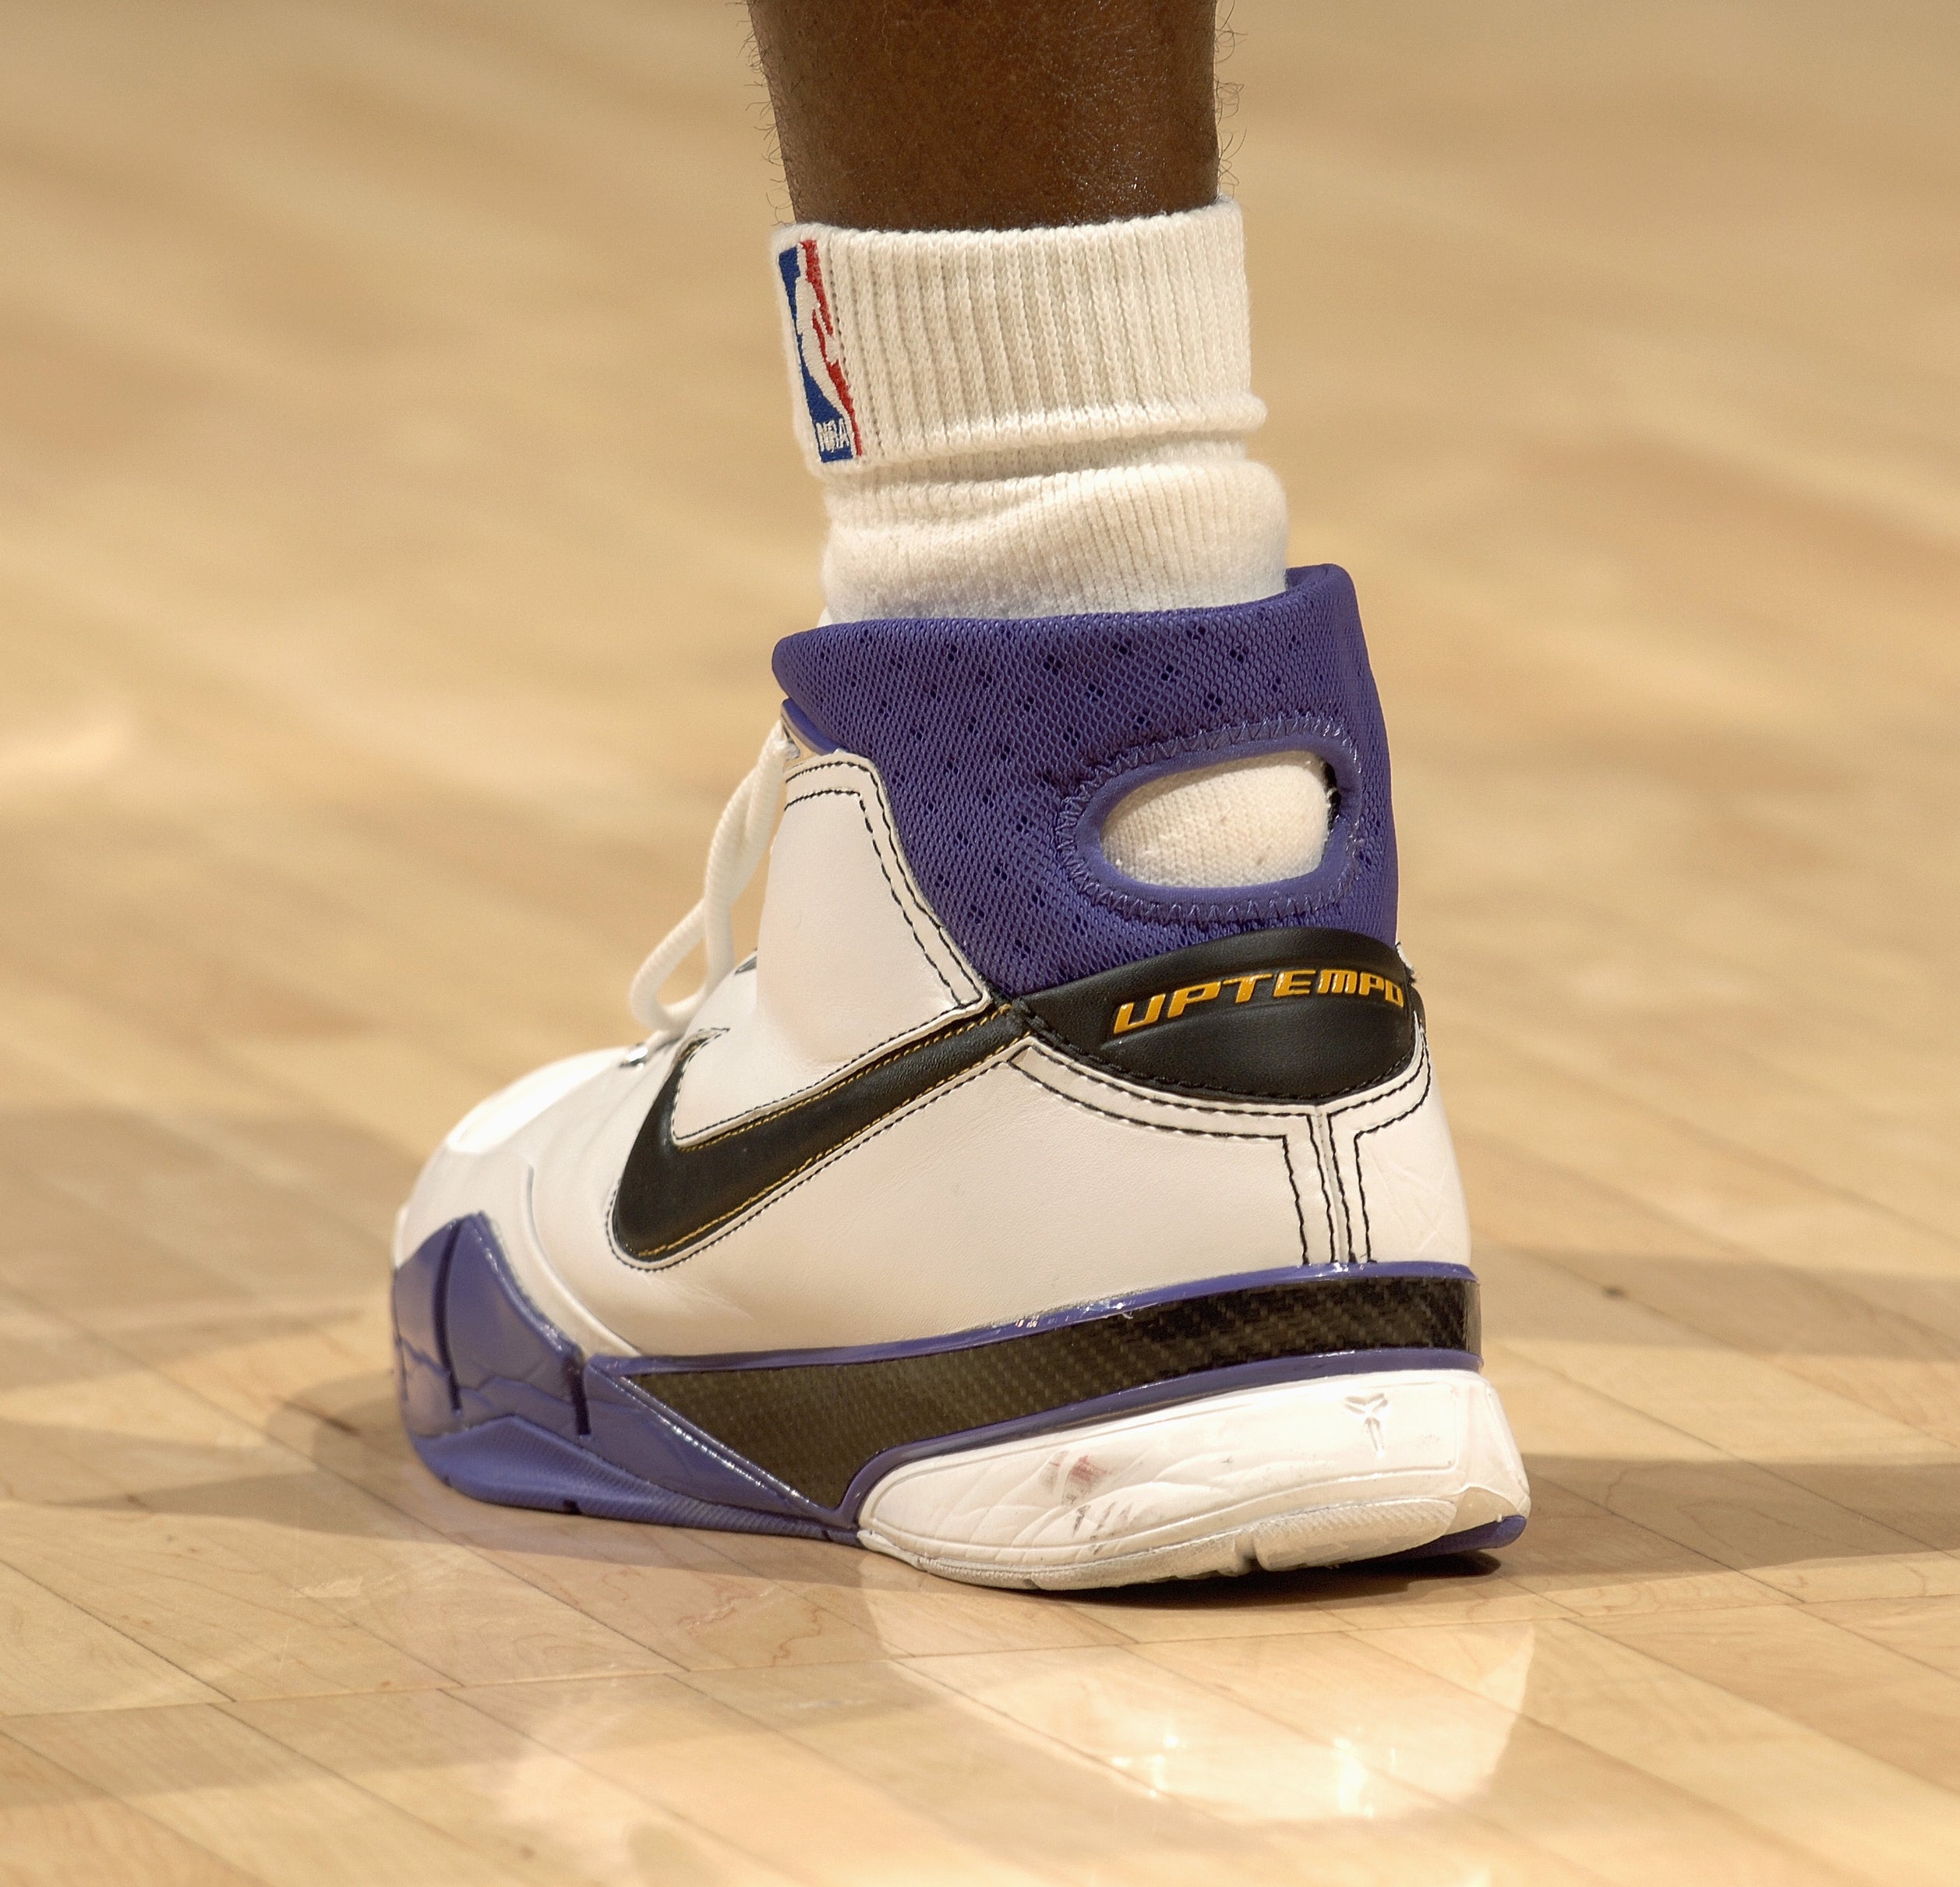 The shoe of Kobe Bryant #8 of the Los Angeles Lakers is shown during the game against the Toronto Raptors on January 22, 2006 at Staples Center in Los Angeles, California.